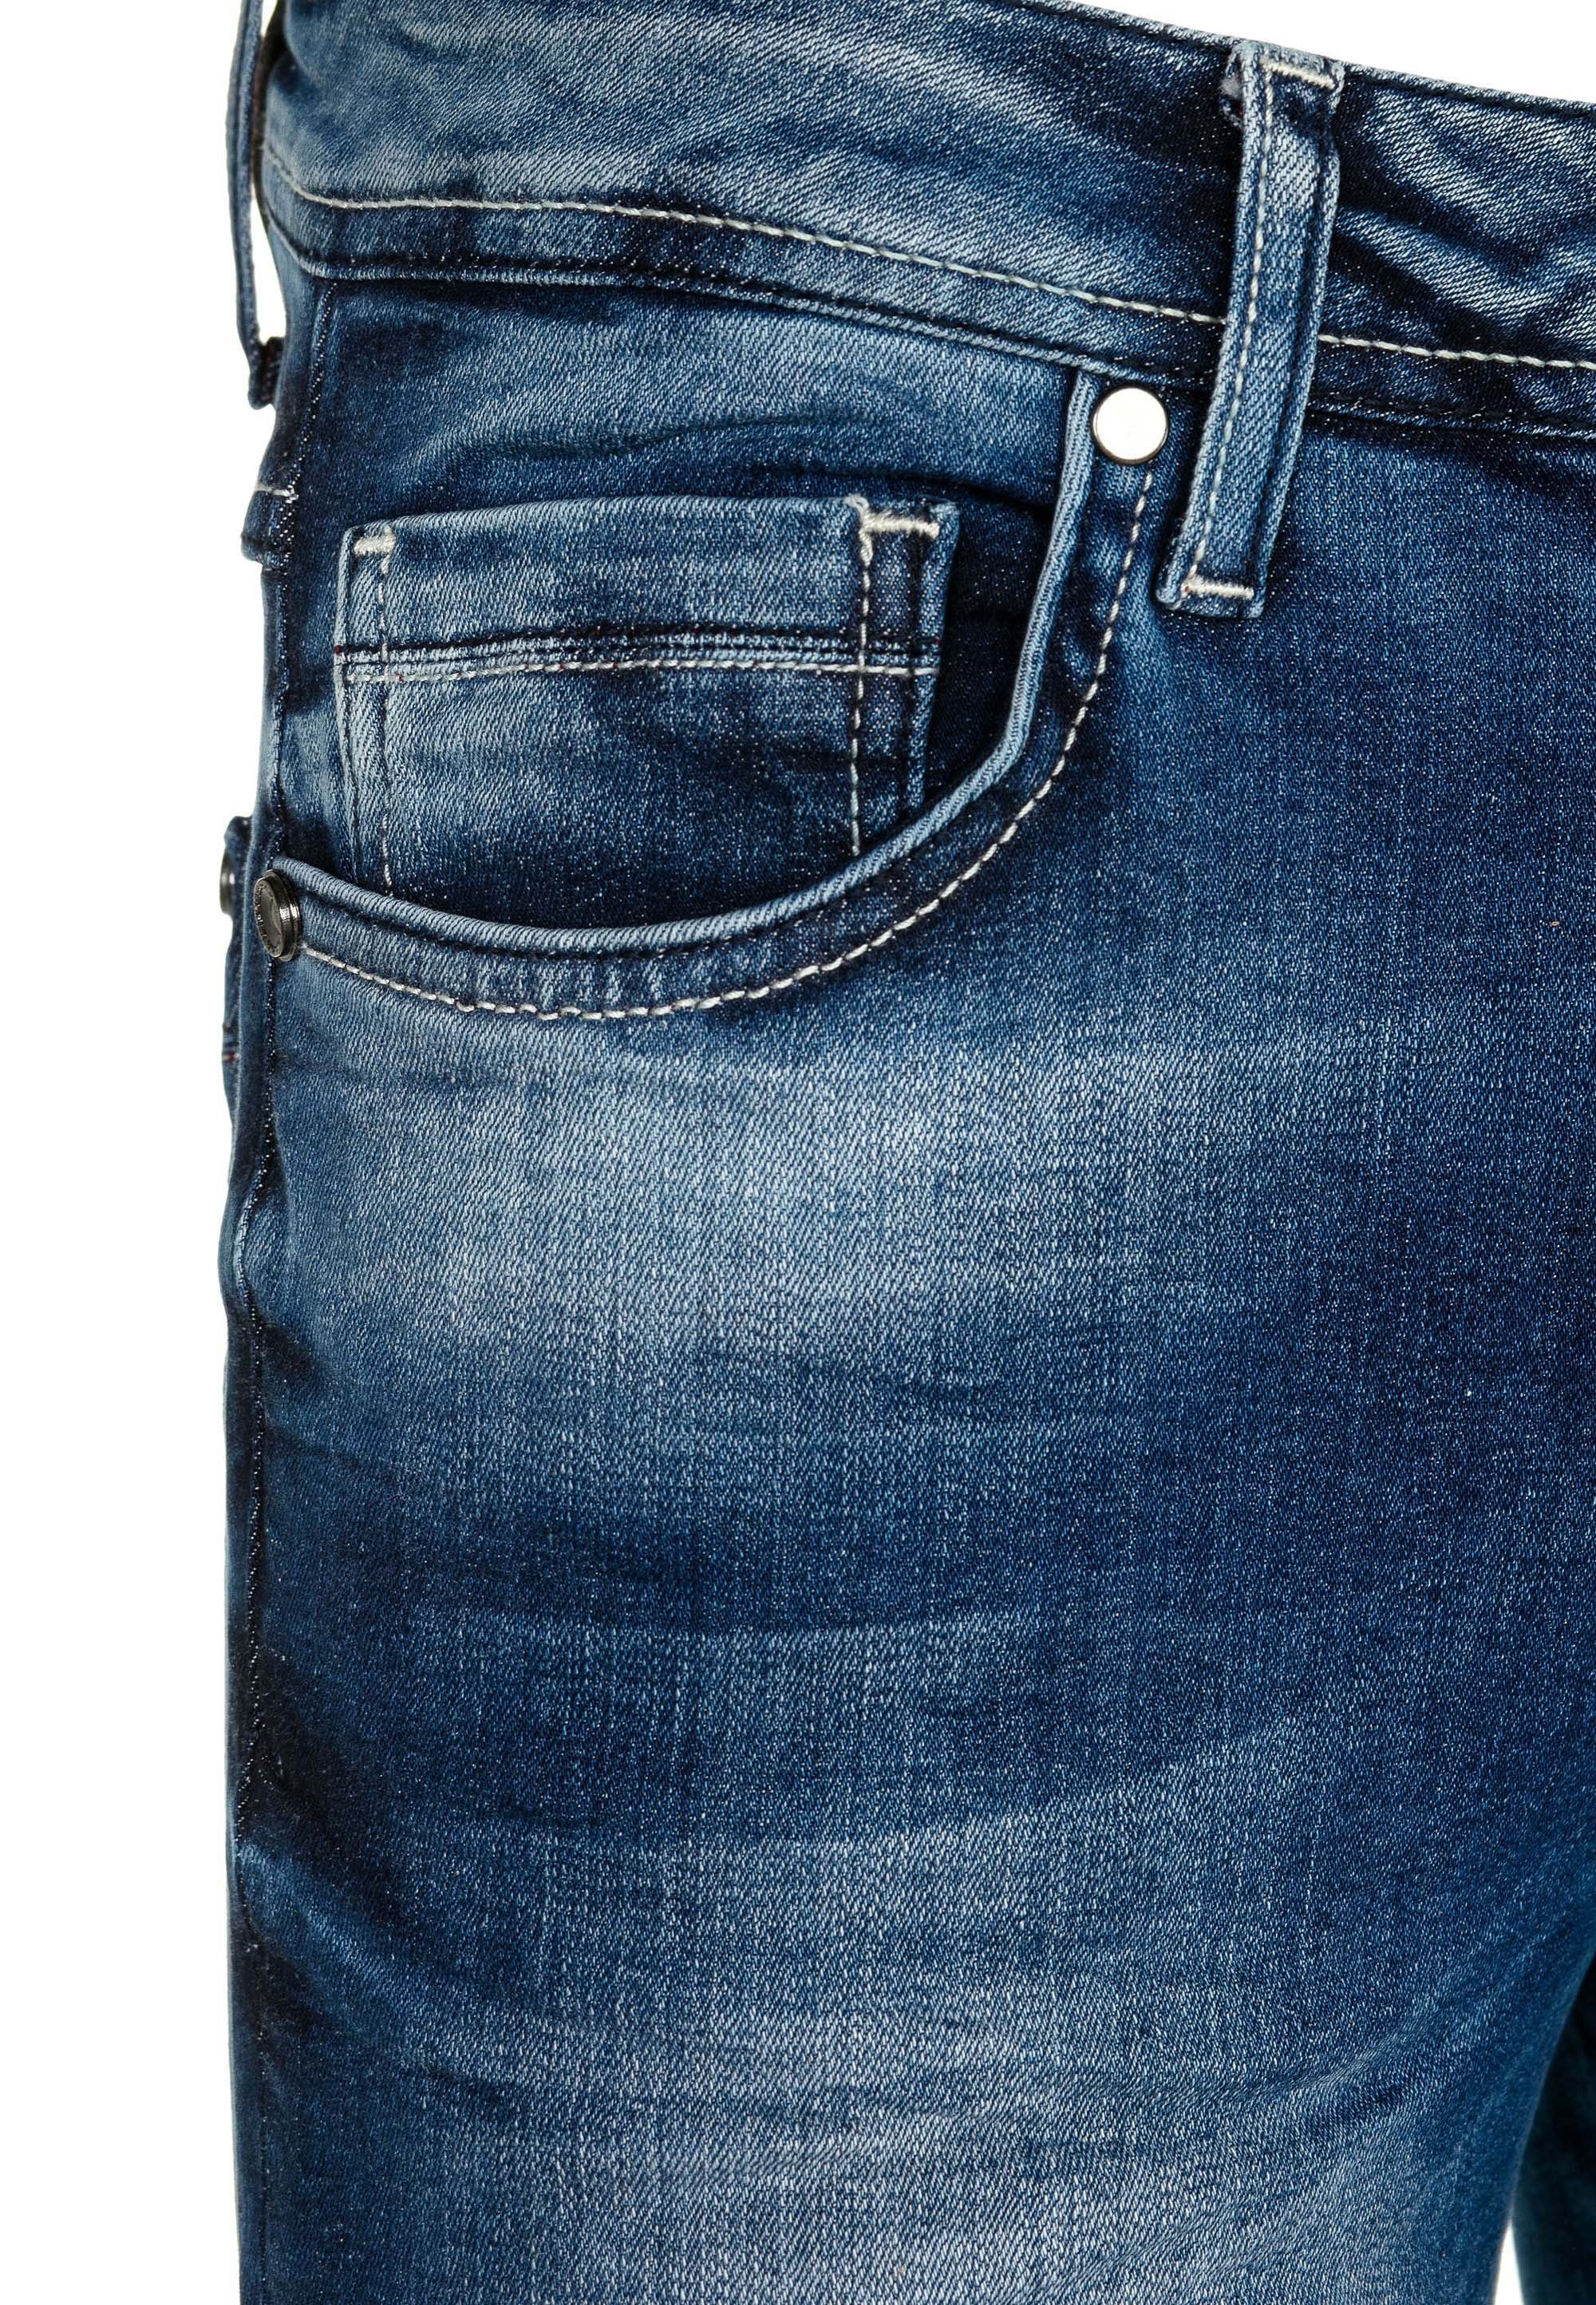 Waschung & Baxx Cipo Fit mit Straight in Slim-fit-Jeans cooler